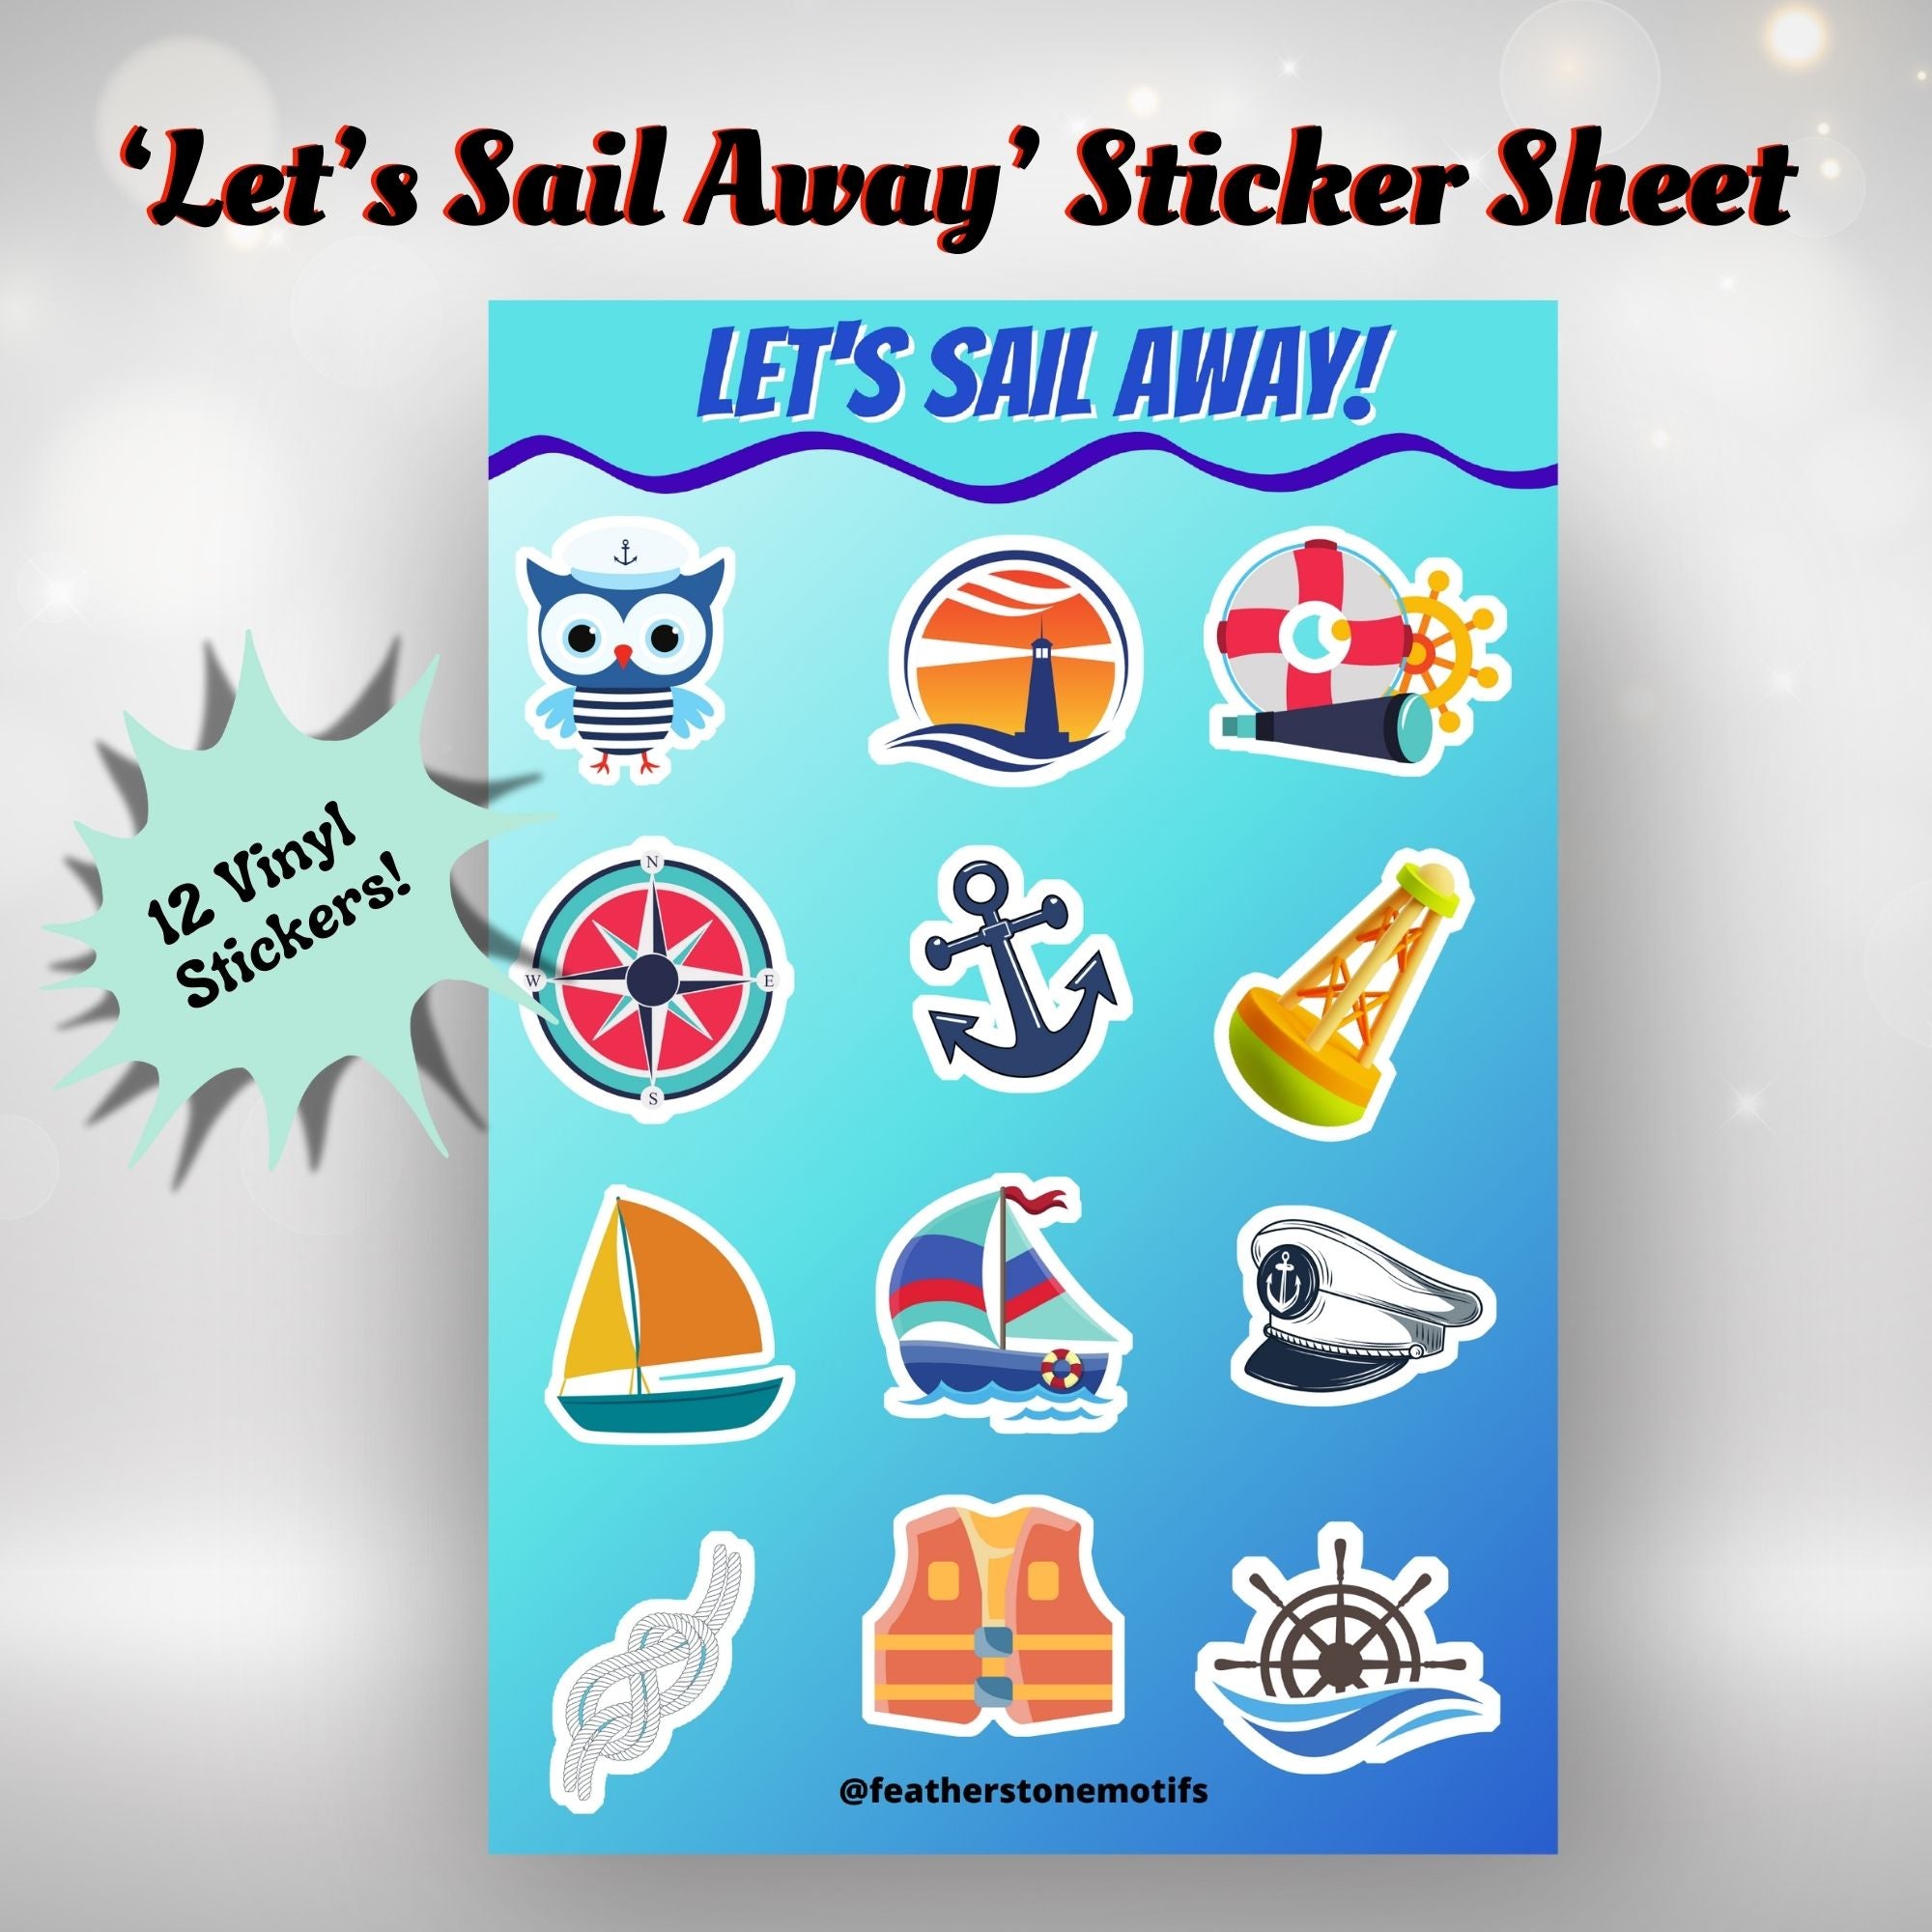 This image shows the Let's Sail Away sticker sheet with 12 vinyl stickers that is included in the Sailing themed Camp Postcard Kit.